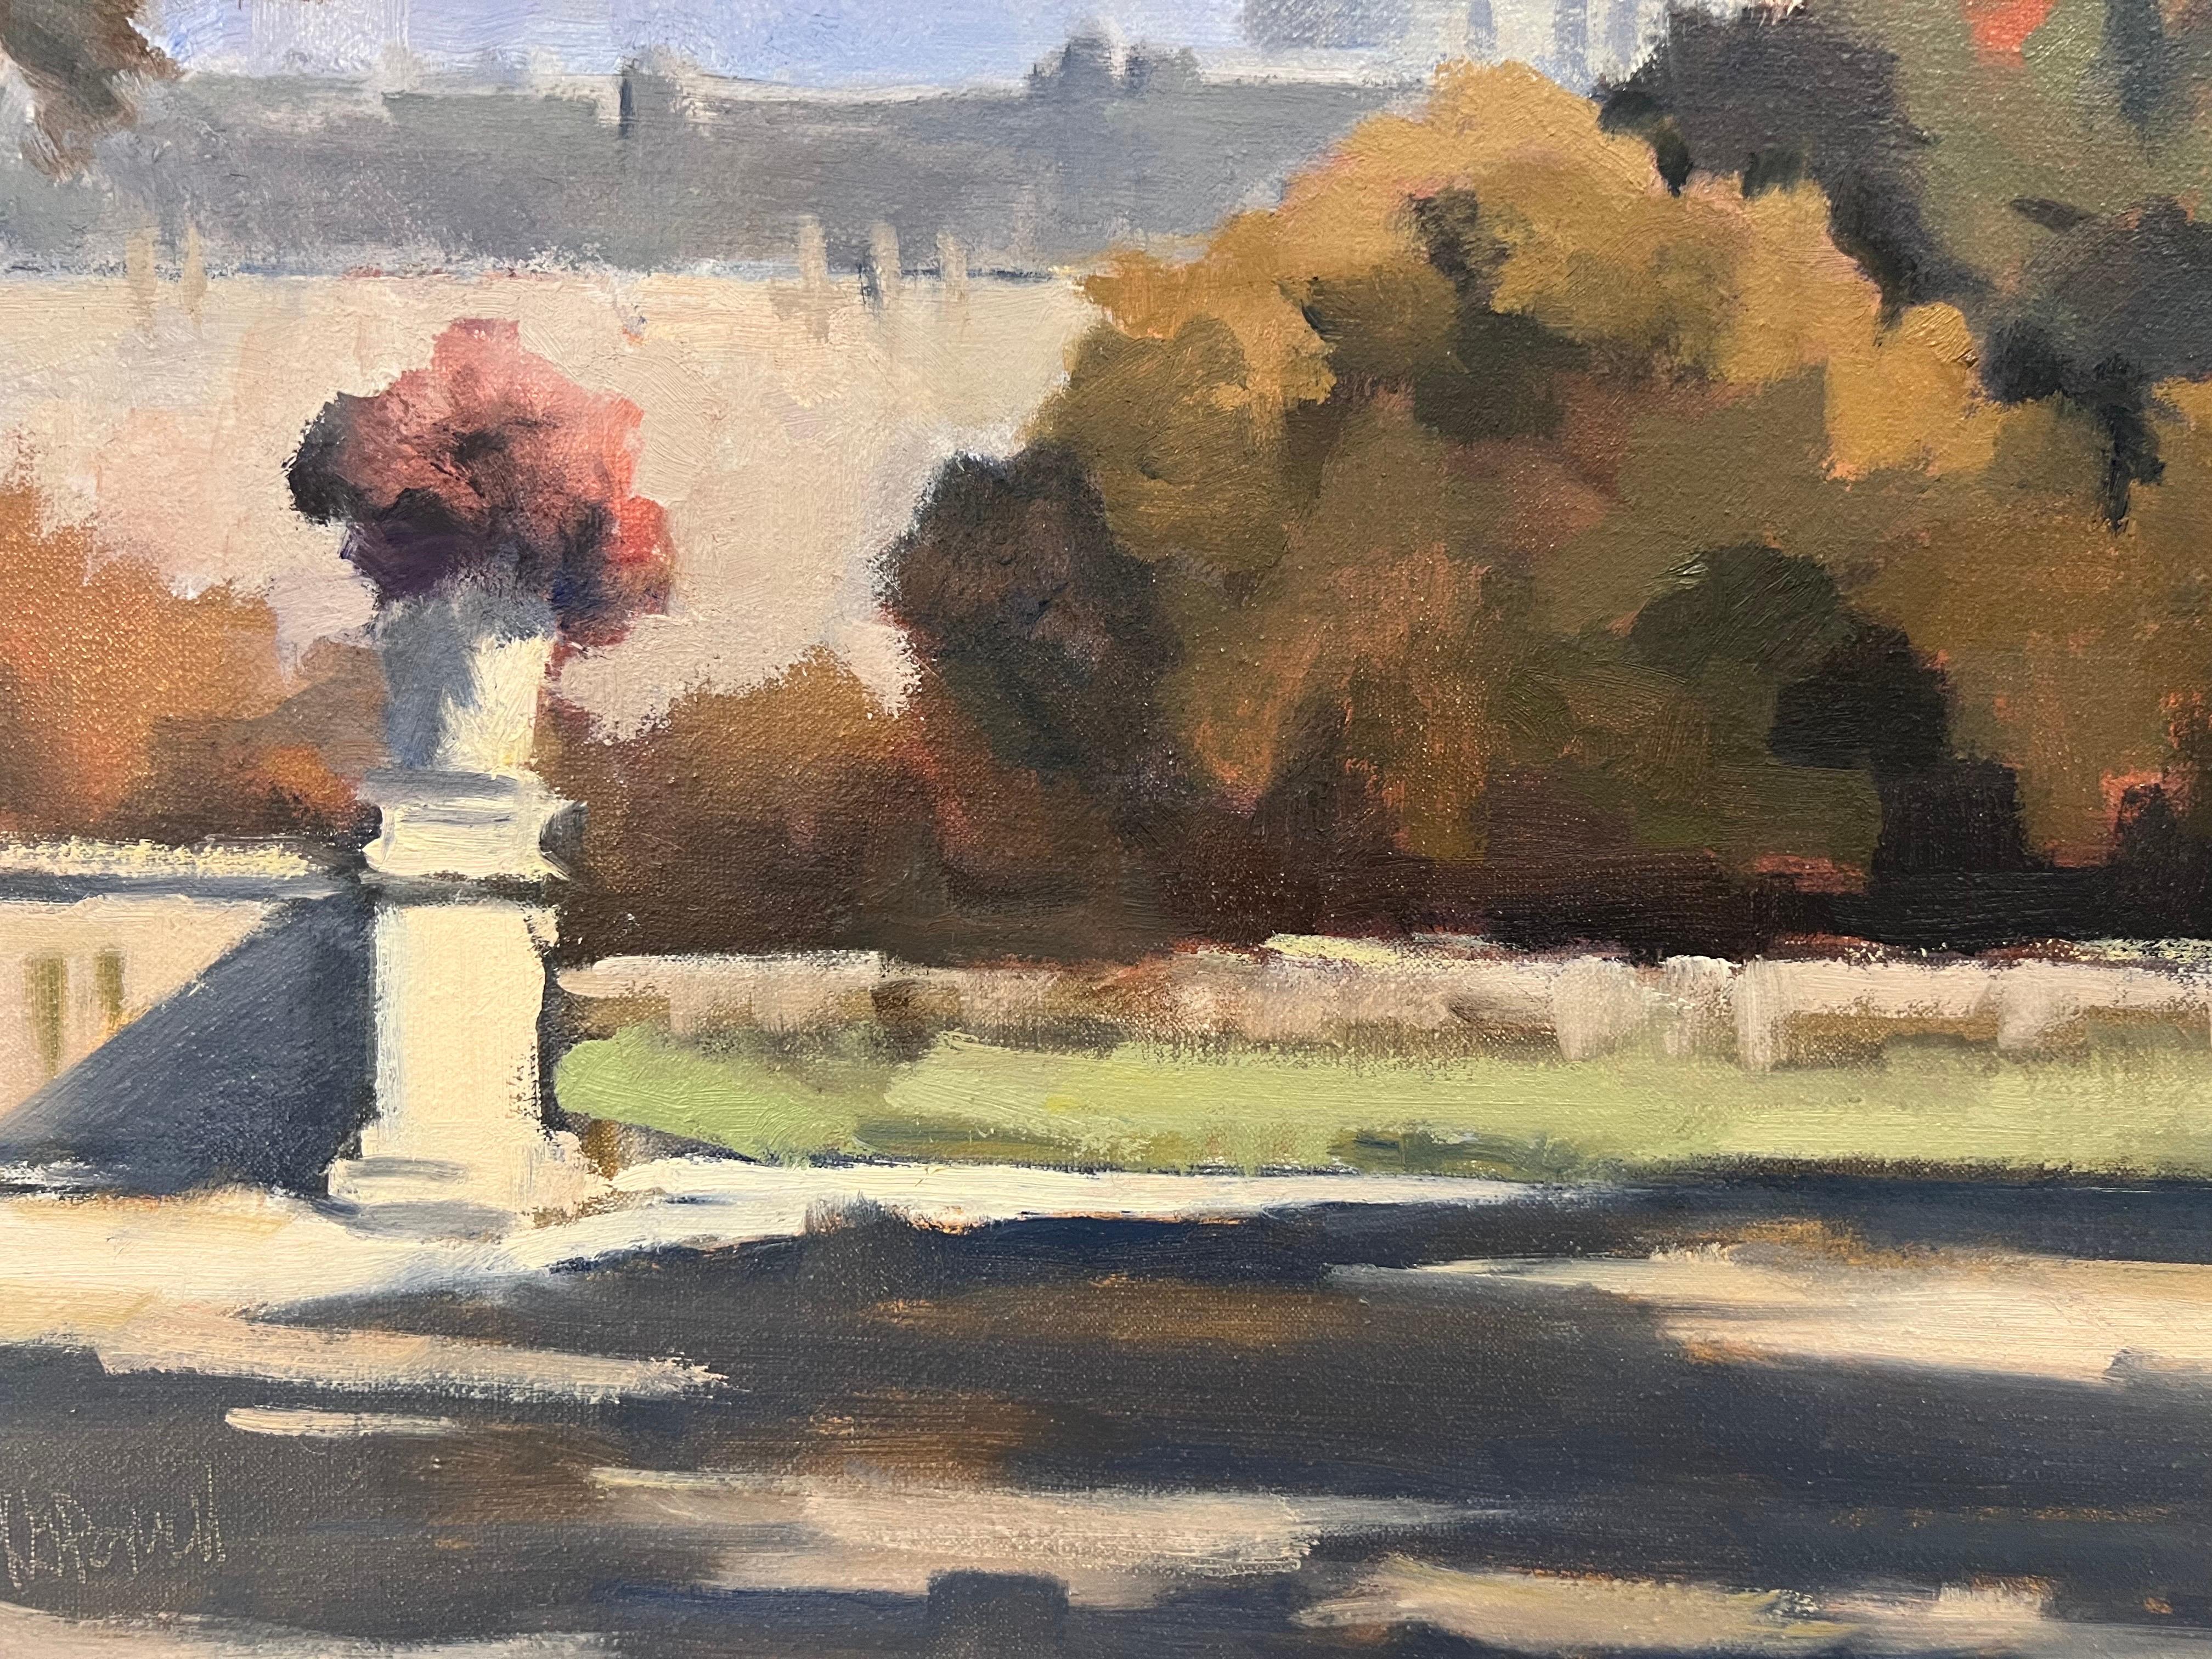 Pantheon, from Luxembourg Gardens by Lesley Powell, Oil on Canvas Parisian Scene 2